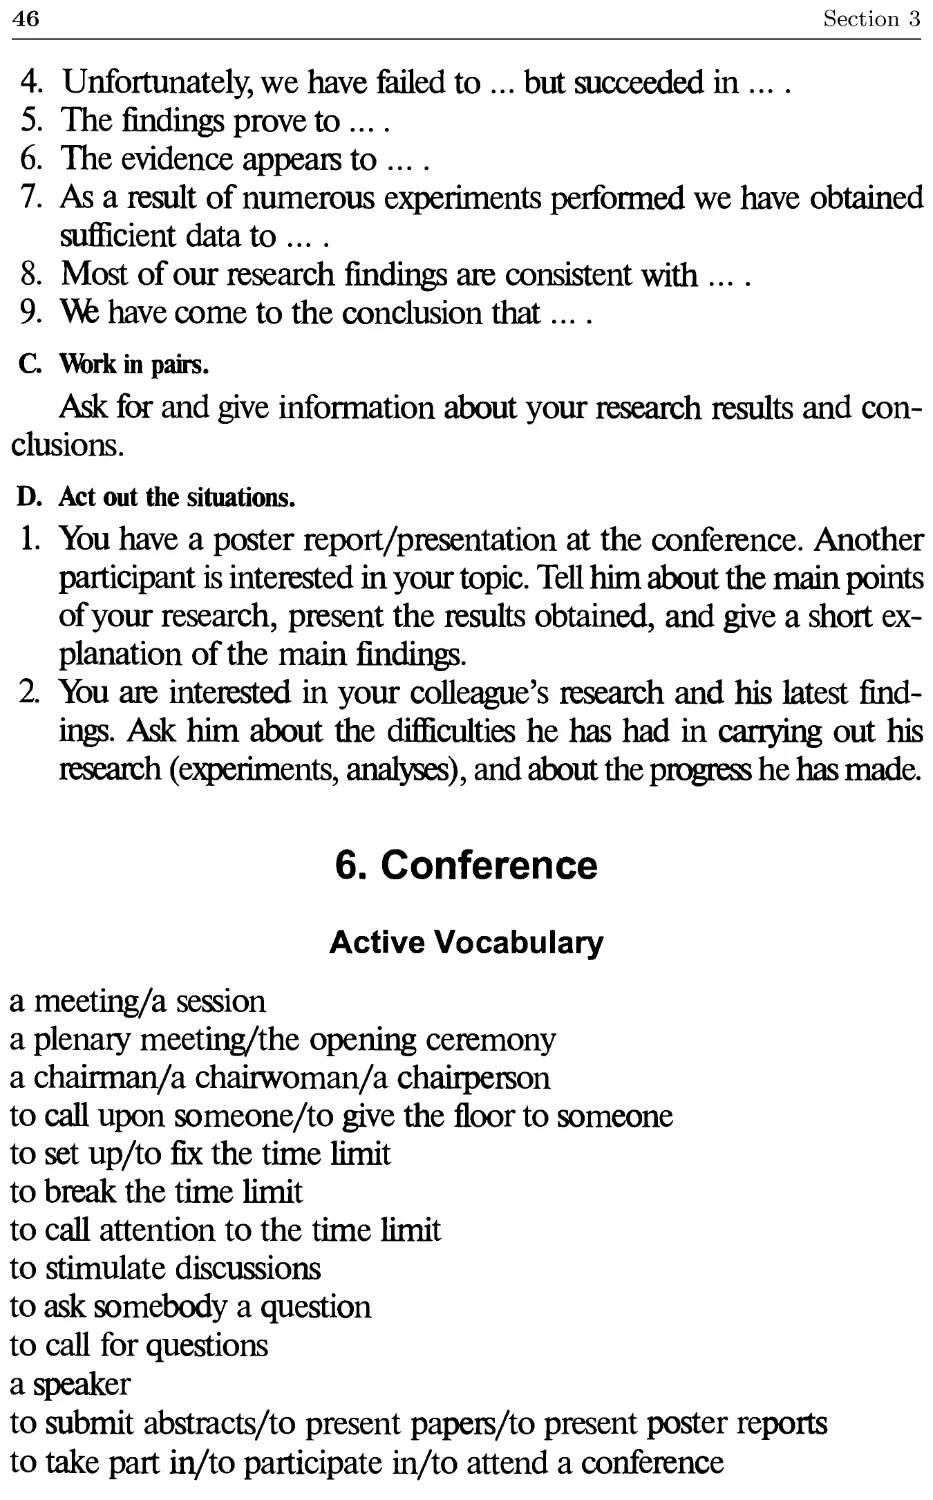 6. Conference